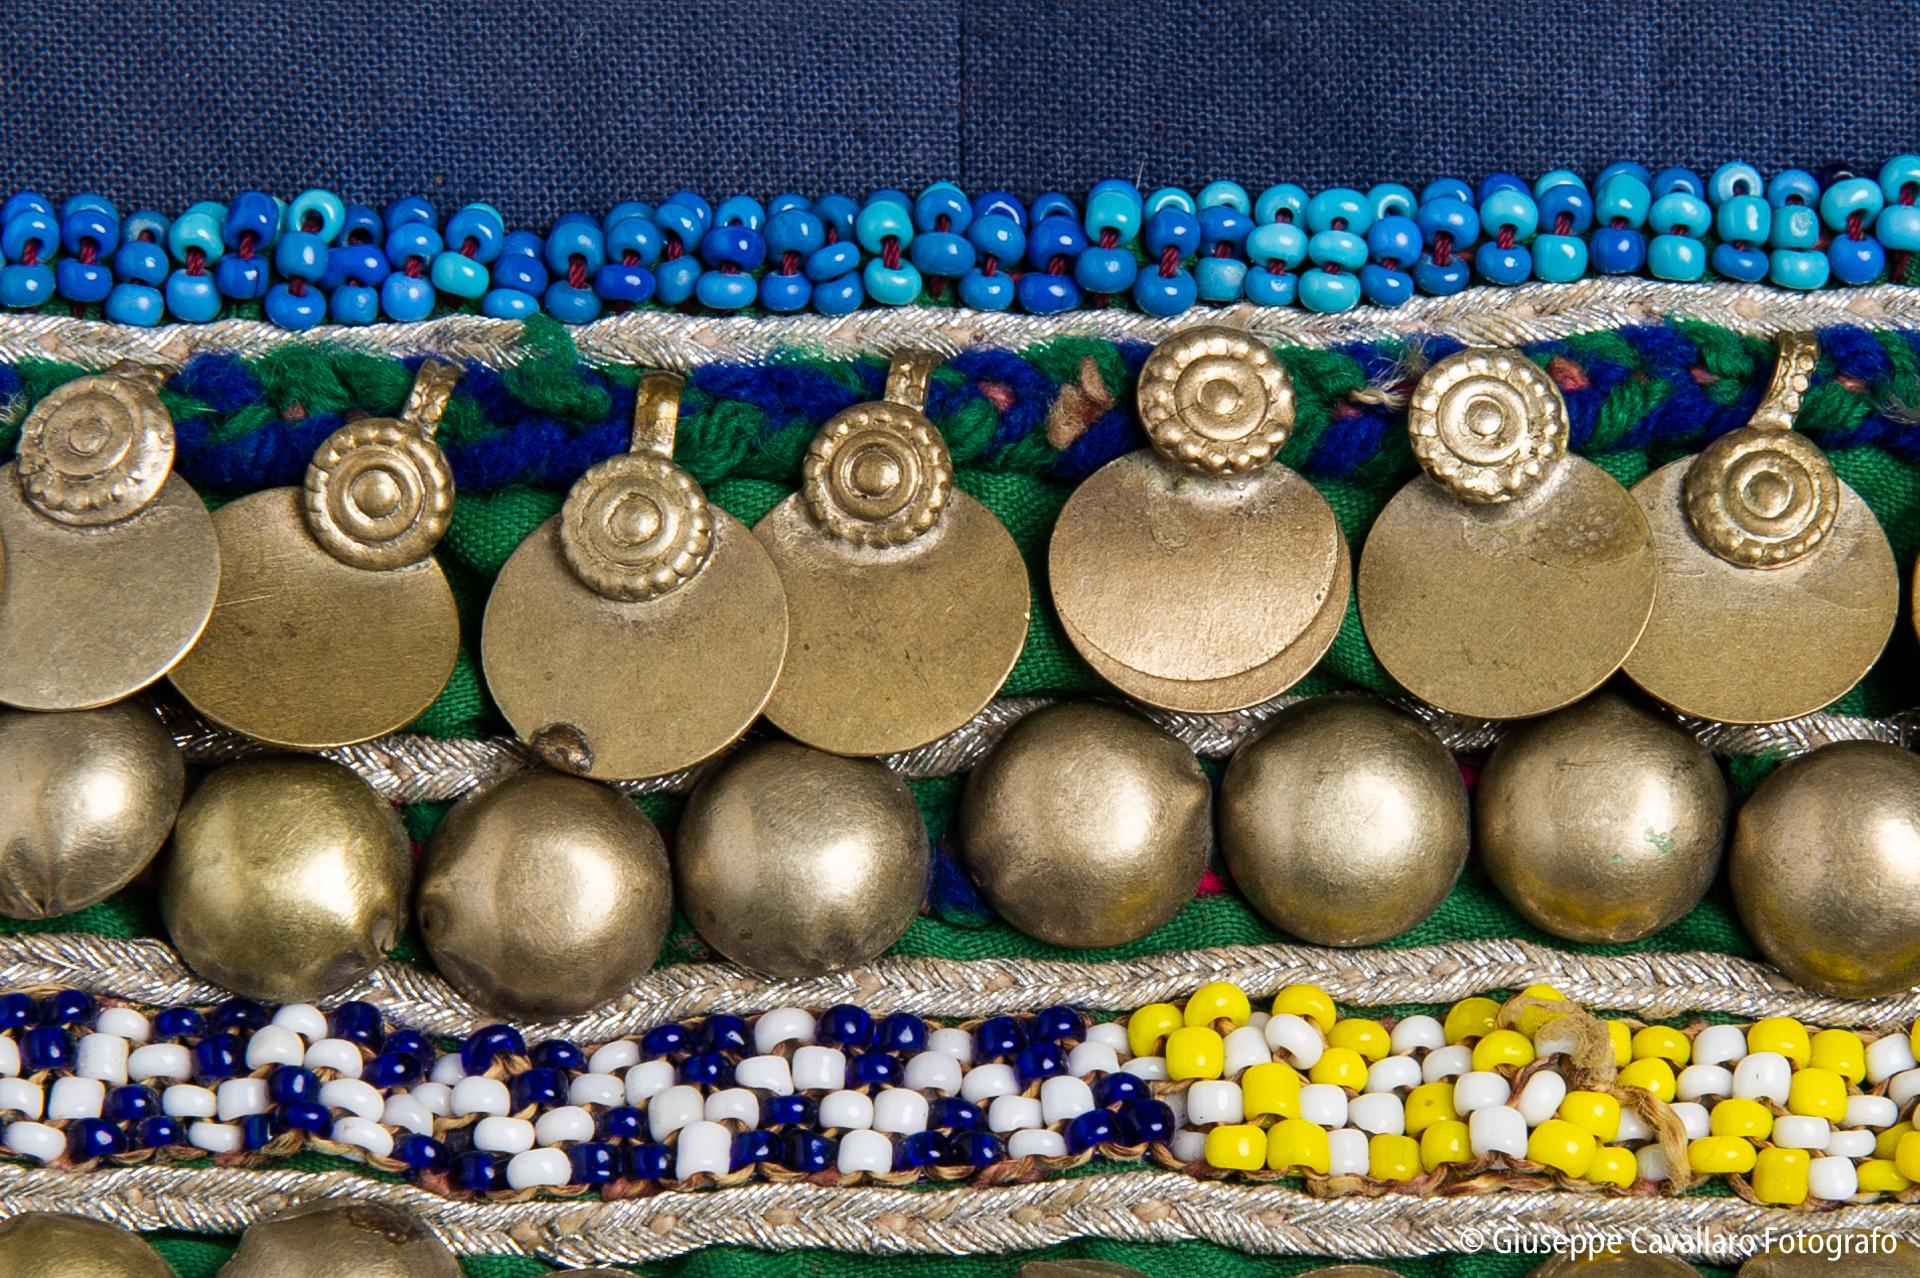 Other Old Afghan Belts with Ancient Coins, also as Curtain-holders